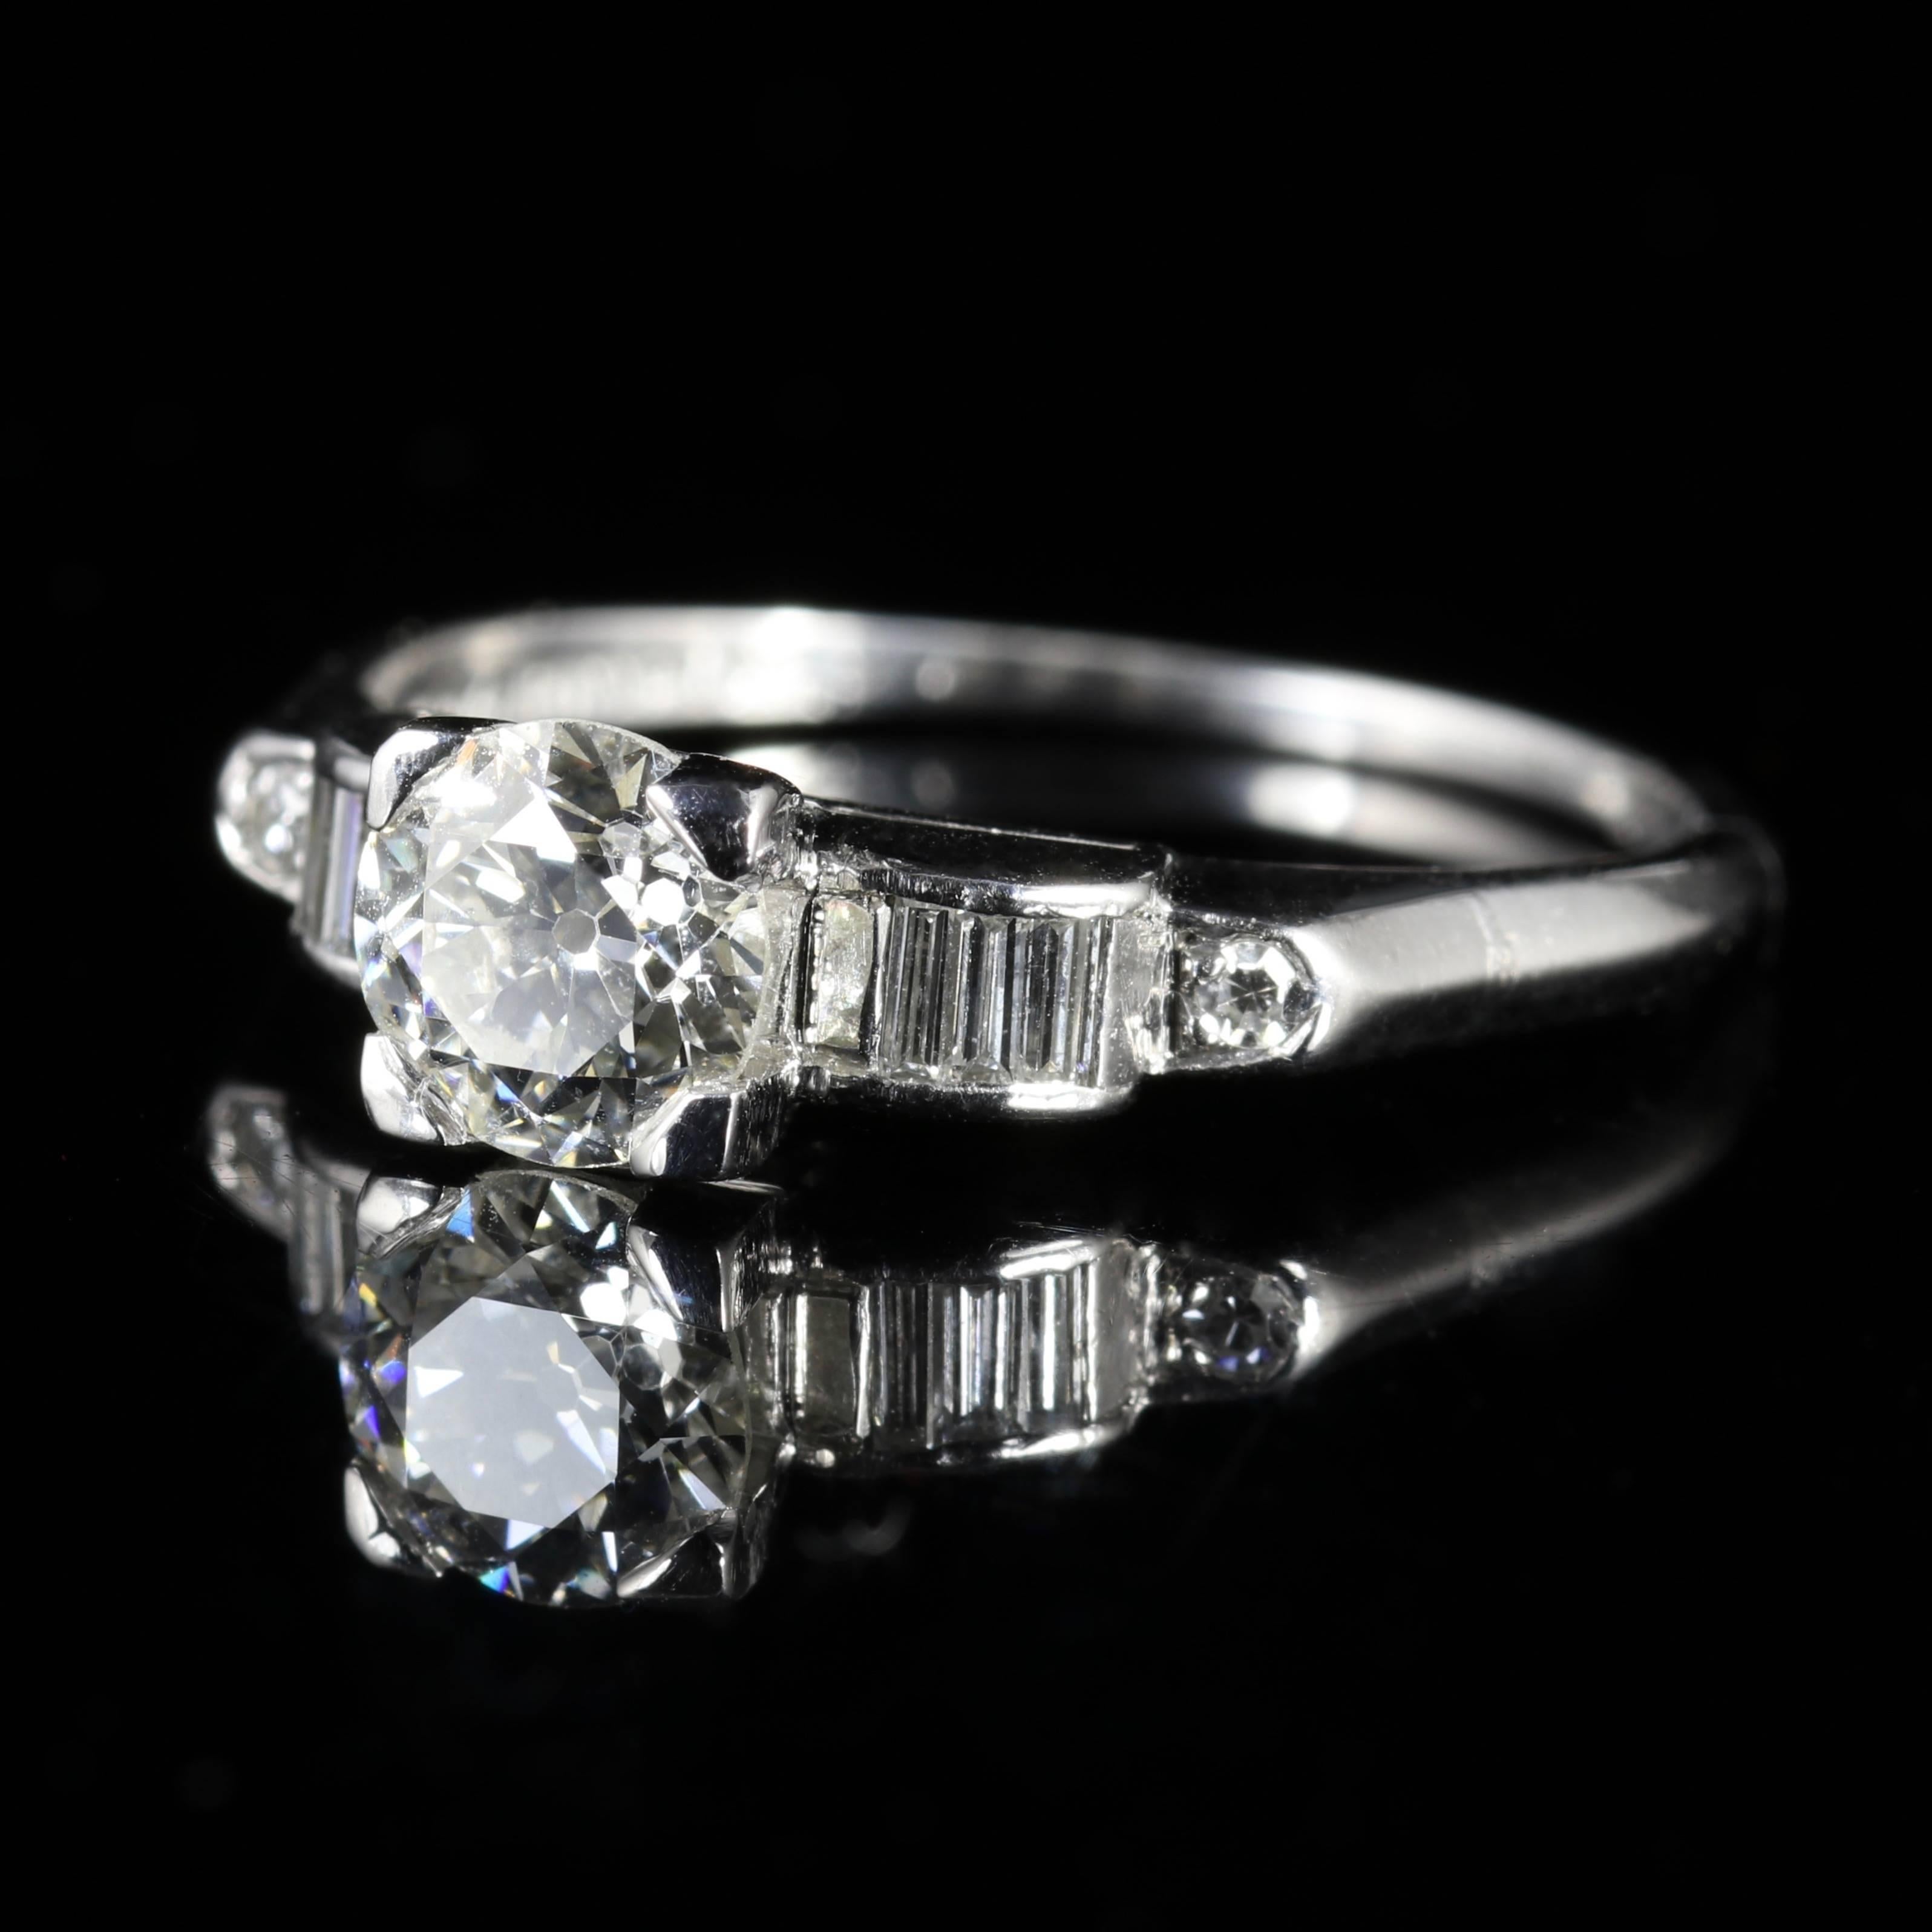 This beautiful 1.25ct Art Deco ring is circa 1920 - Set with a lovely old cut Diamond and Baguette Diamond shoulders.

Fully hallmarked Platinum with an inscription inside the shank of the initials of two loved ones gone by.

The central Diamond is